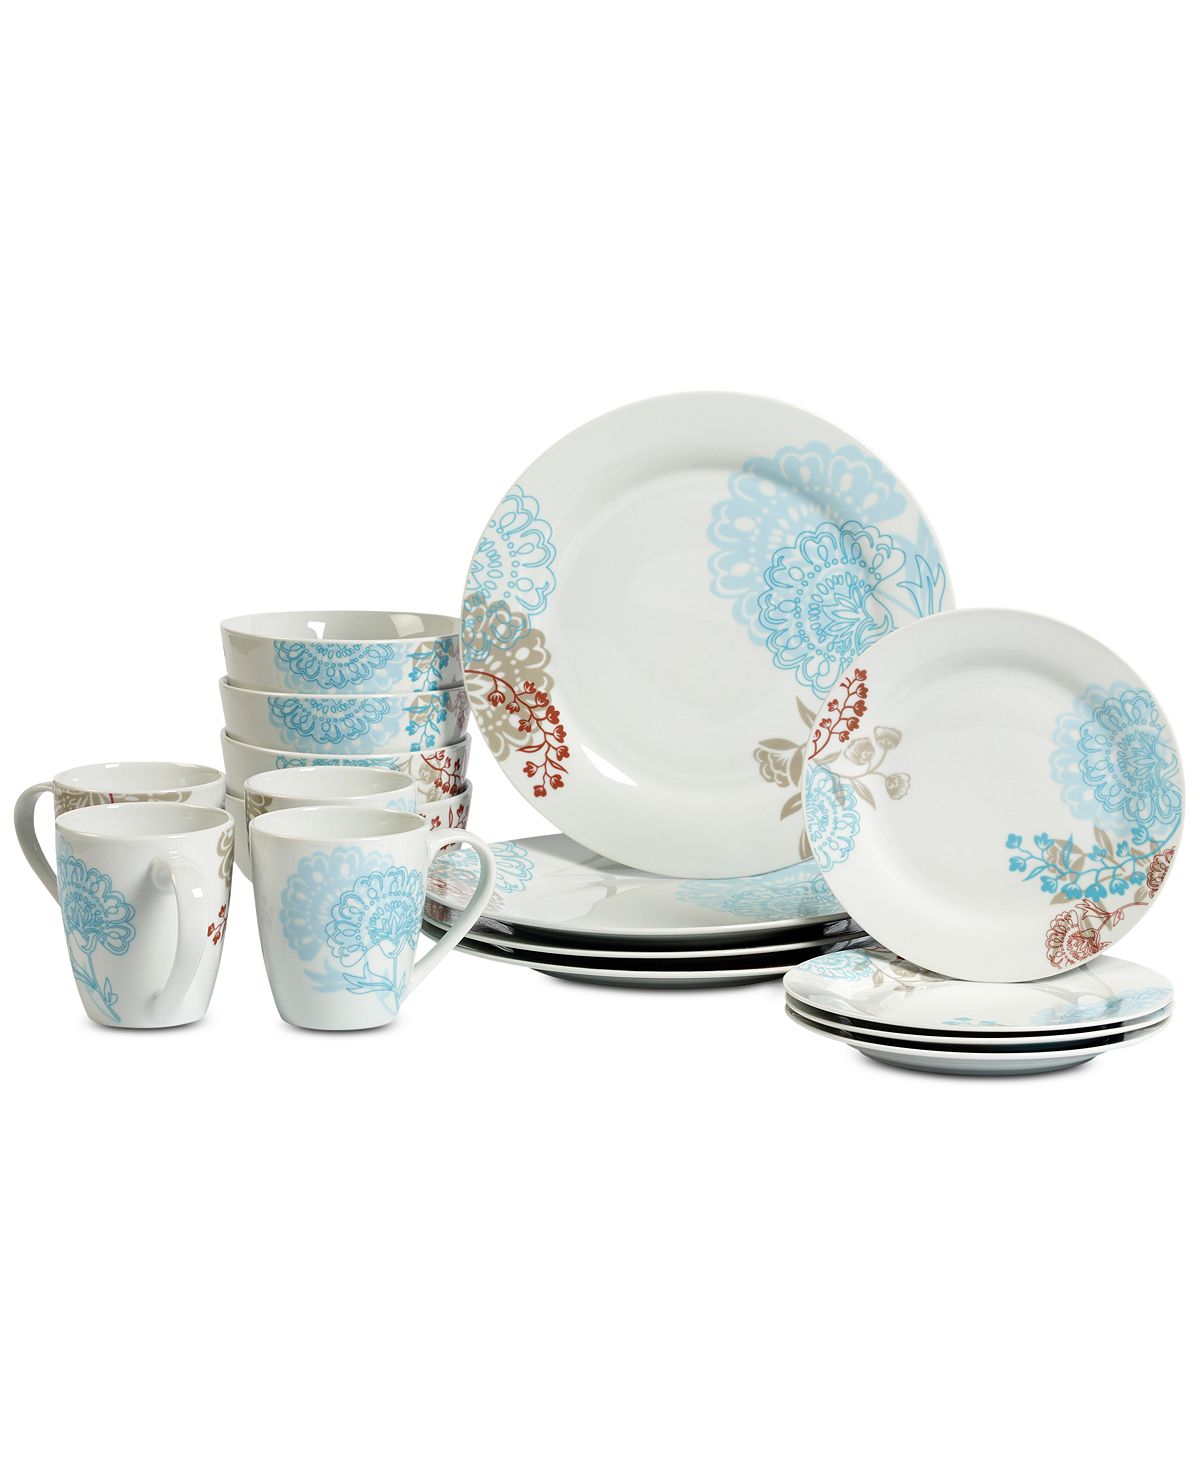 Tabletops Unlimited - Emma 16-Pc. Dinnerware Set, Service for 4